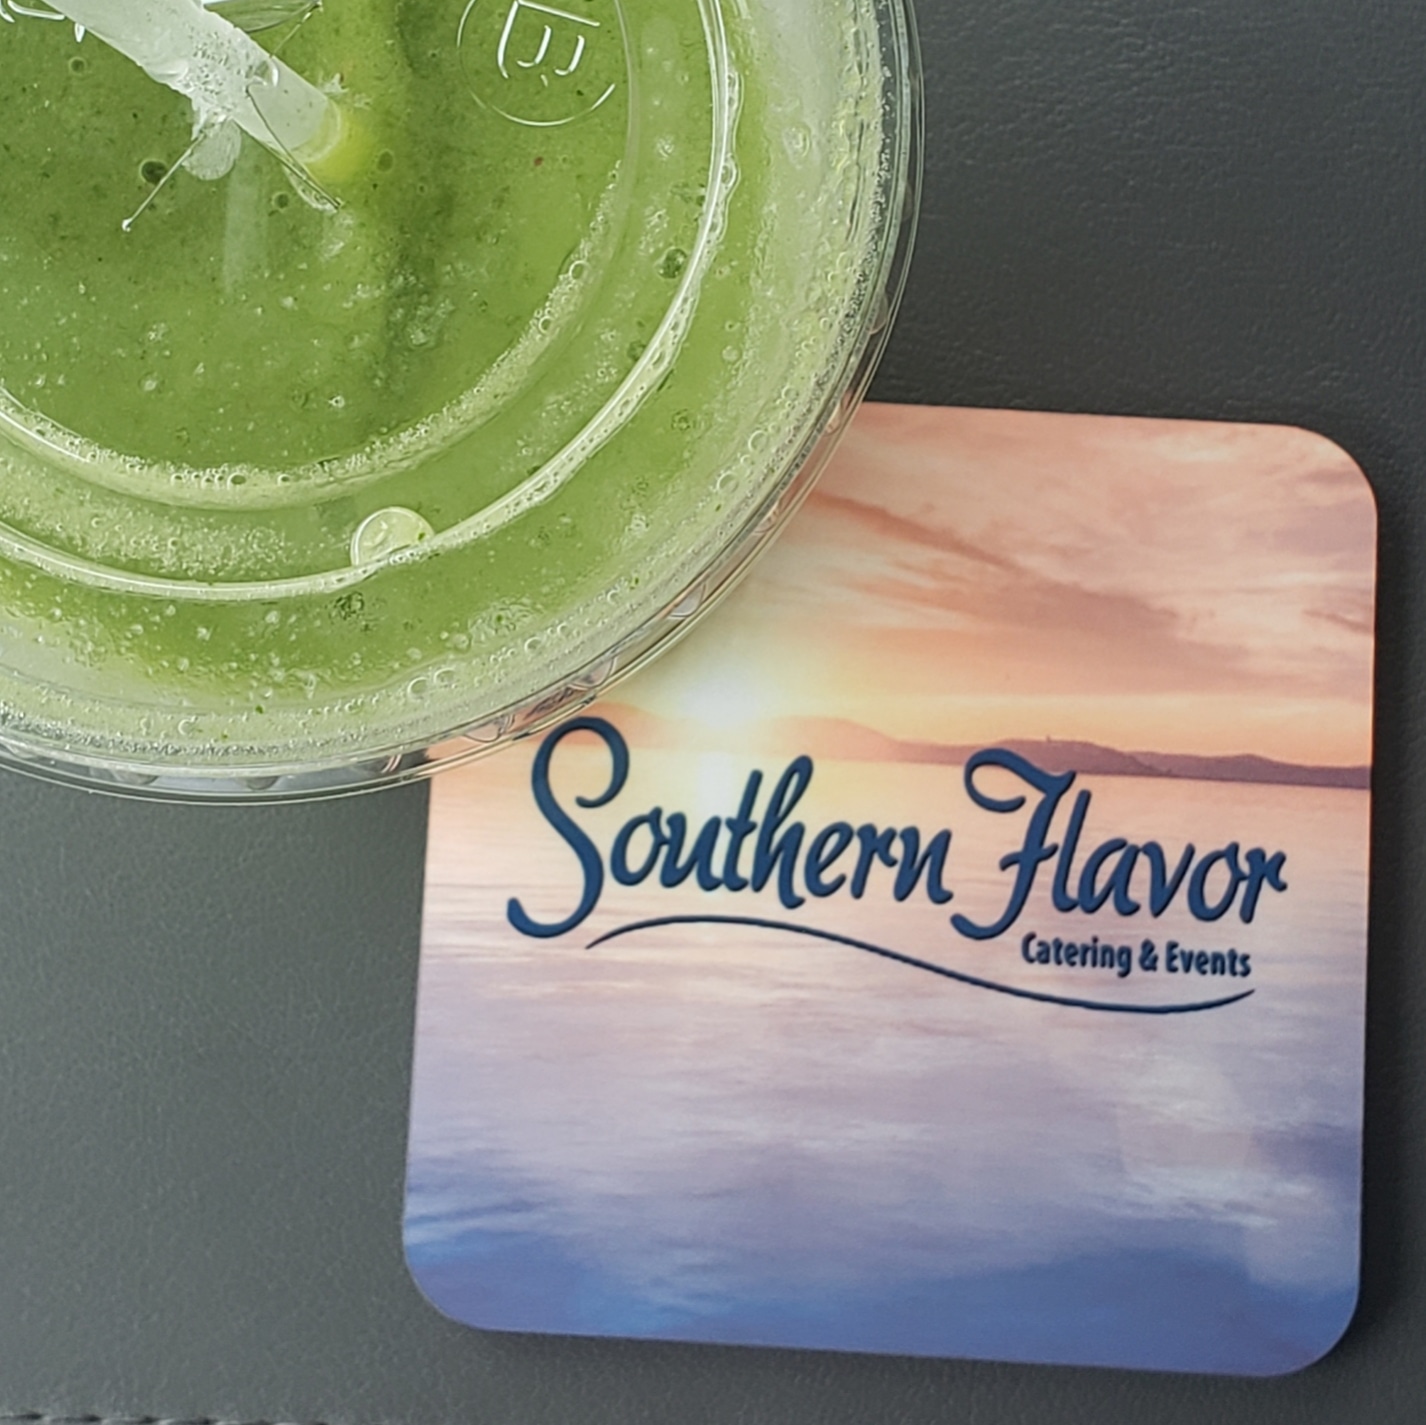 PERSONALIZED COASTER FOR SOUTHERN FLAVOR CATERING!